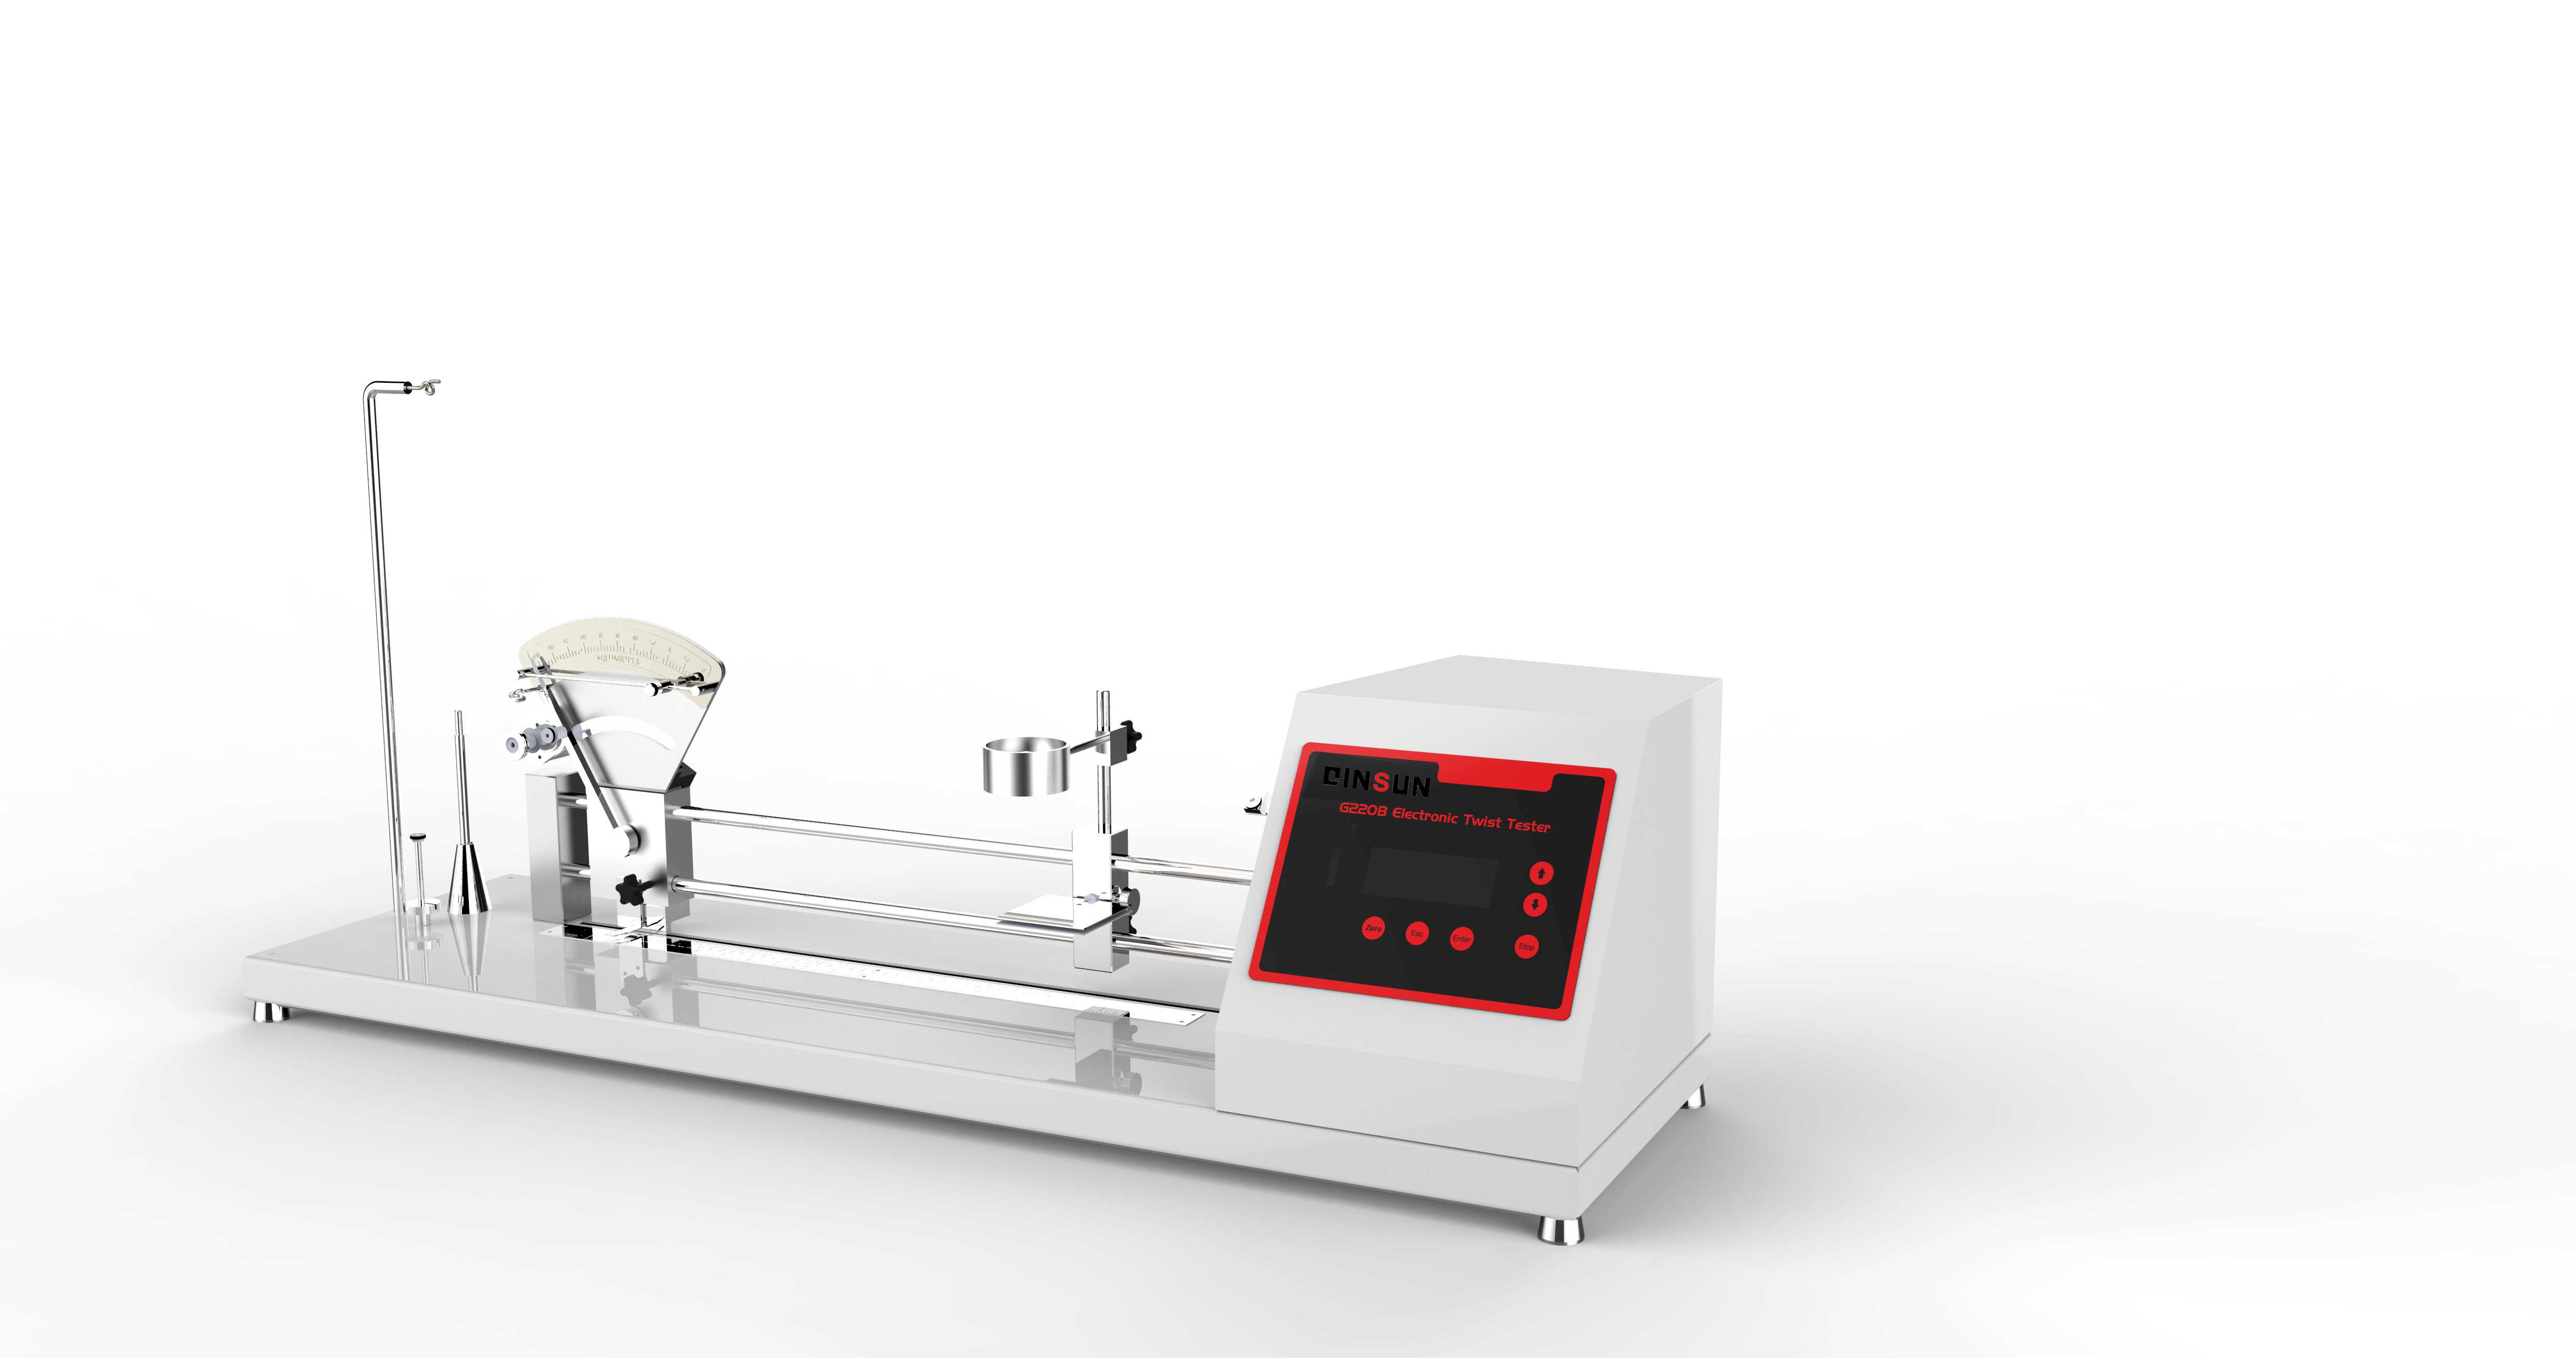 All You Need To Know About Electronic Yarn Twist Tester